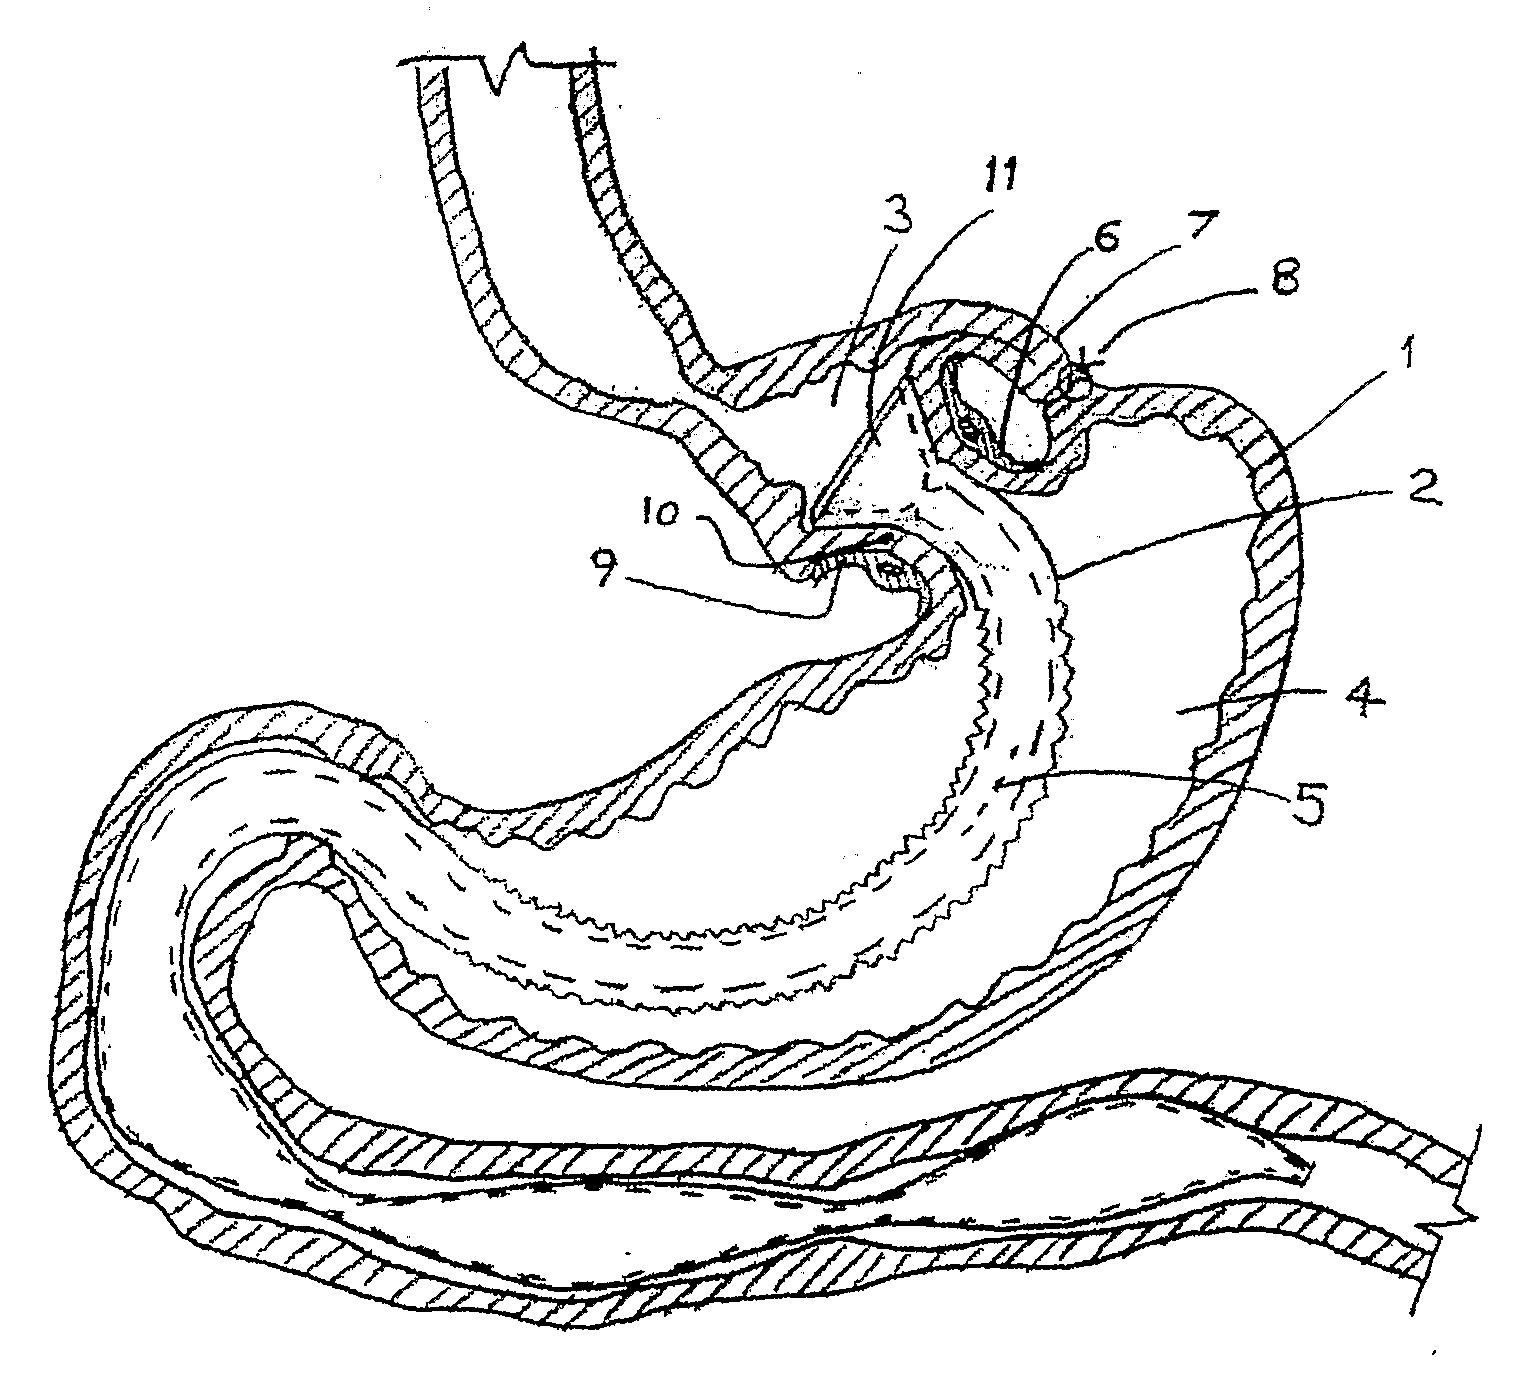 Gastric bypass prosthesis fixation system and method for treatment of obesity